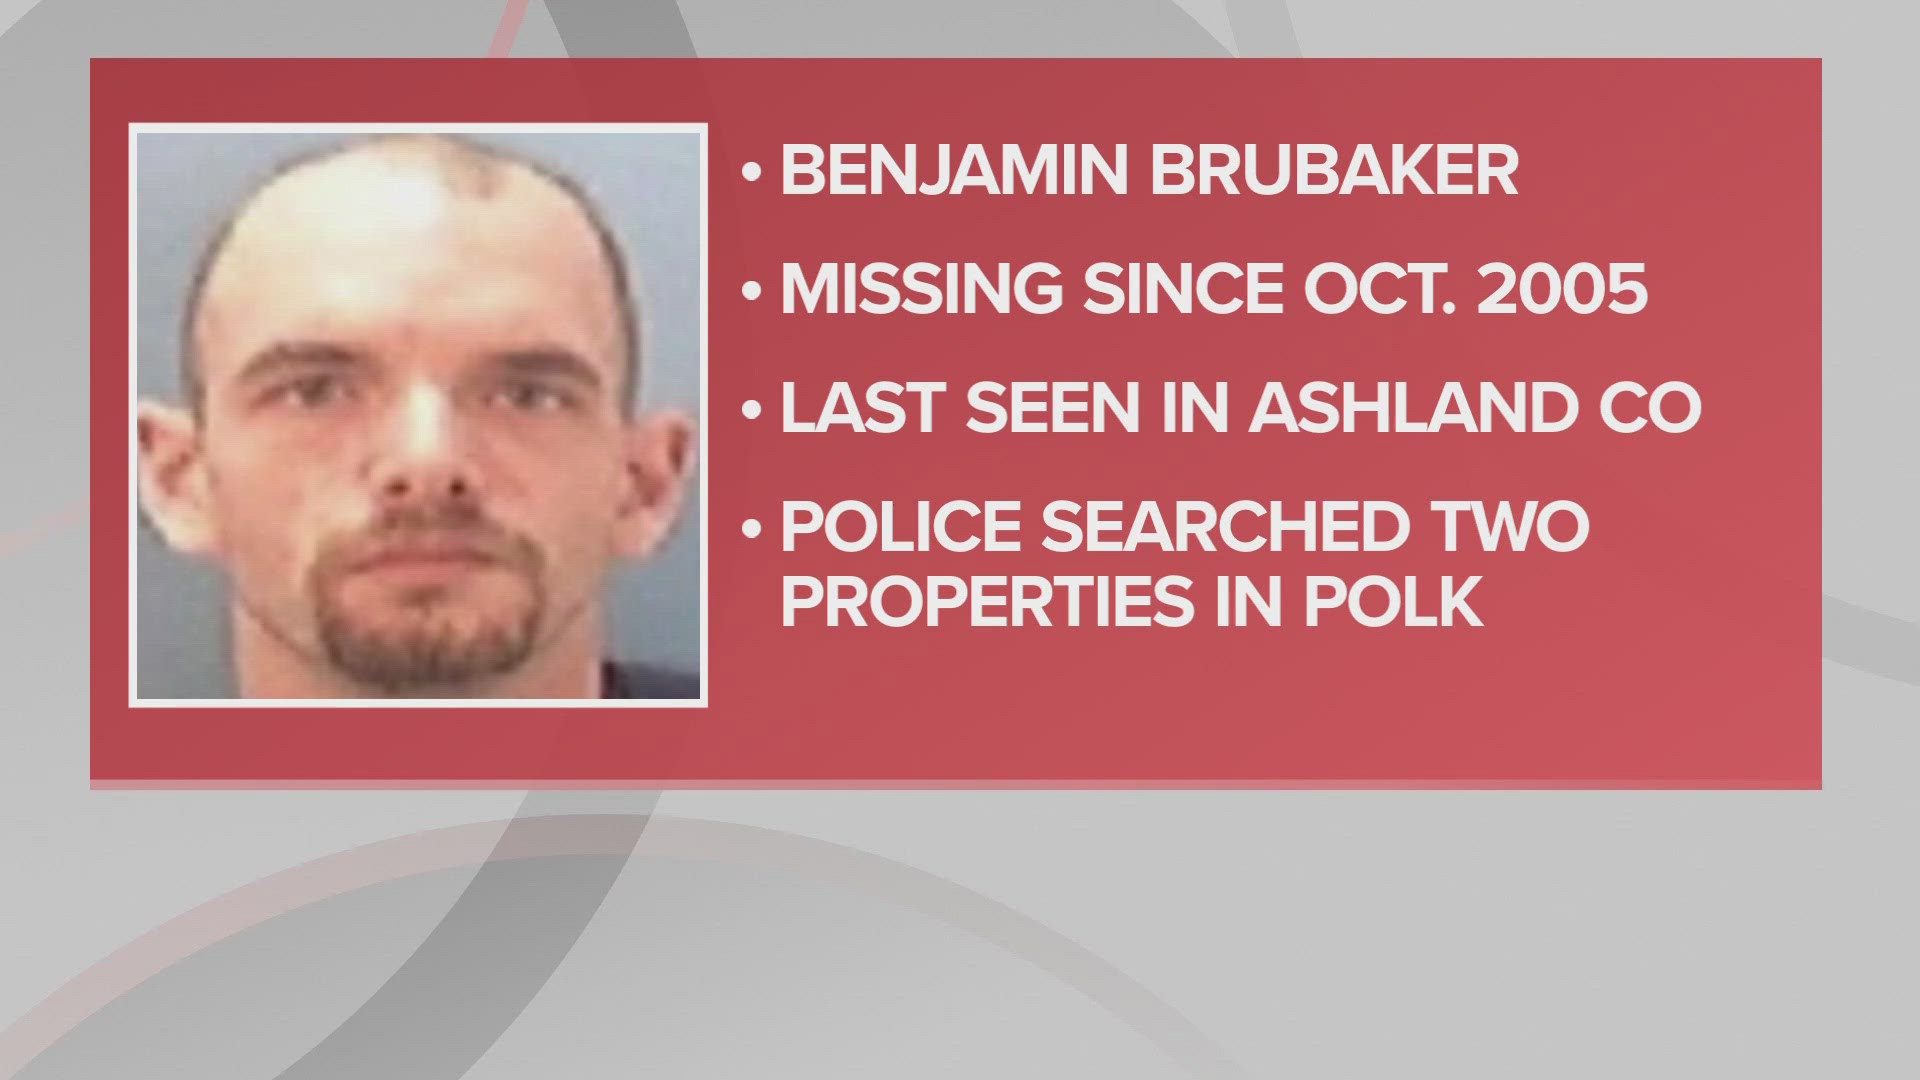 Benjamin Brubaker was 30 years old at the time he was last seen in Ashland County on Oct. 31, 2005, according to details from on the Ohio Attorney General’s site.